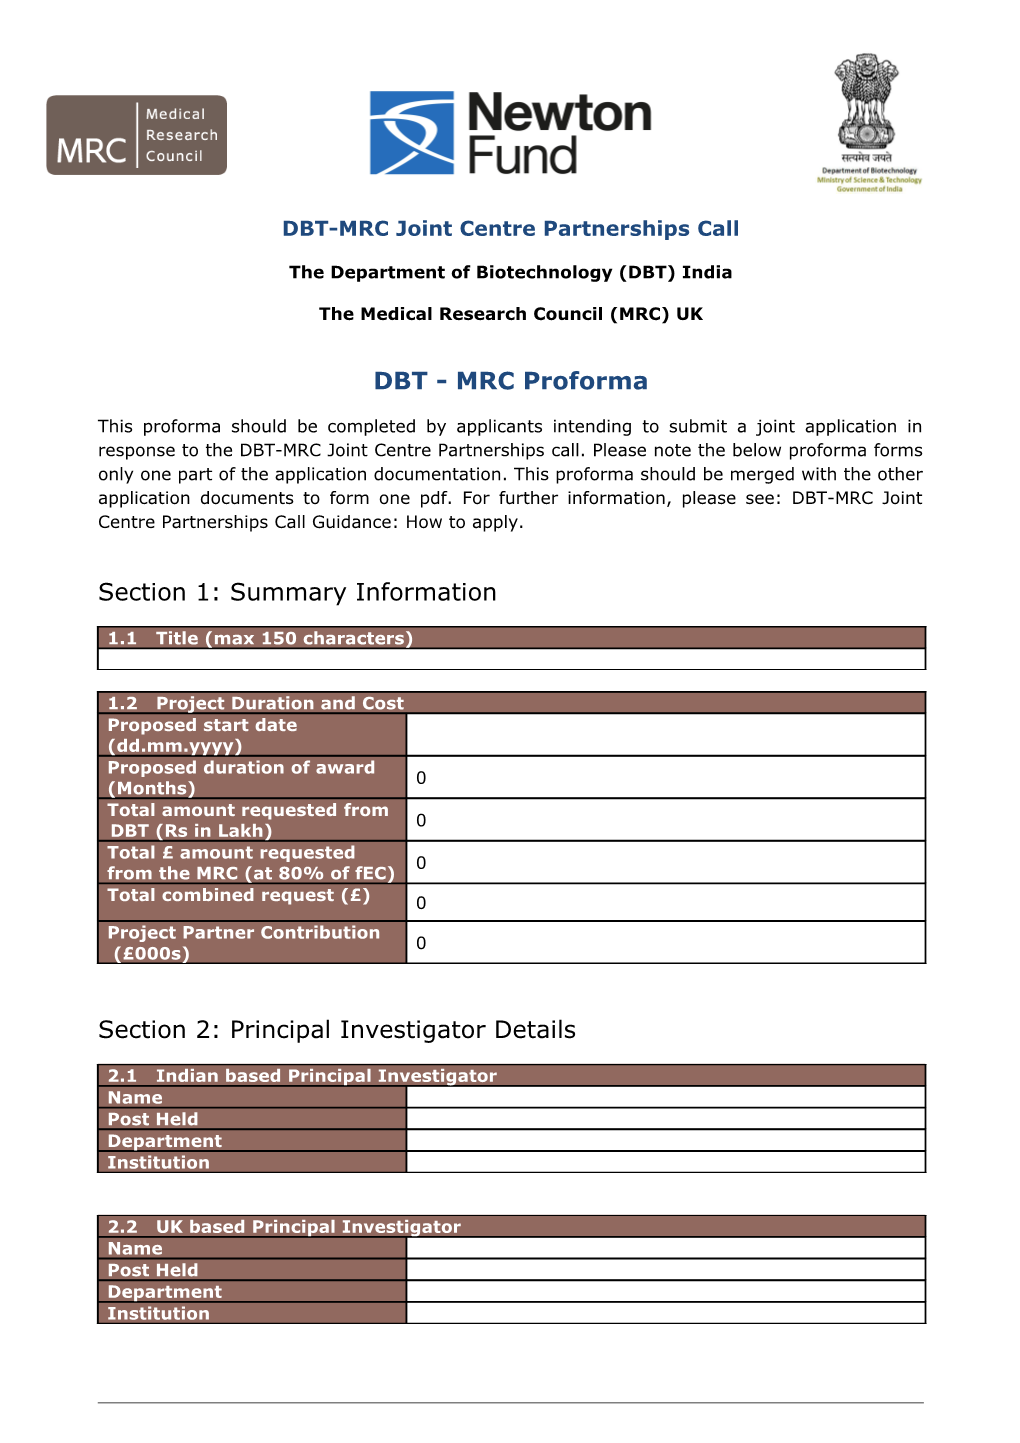 Please Read the DPFS Guidance for Preliminary Applicants When Completing This Form